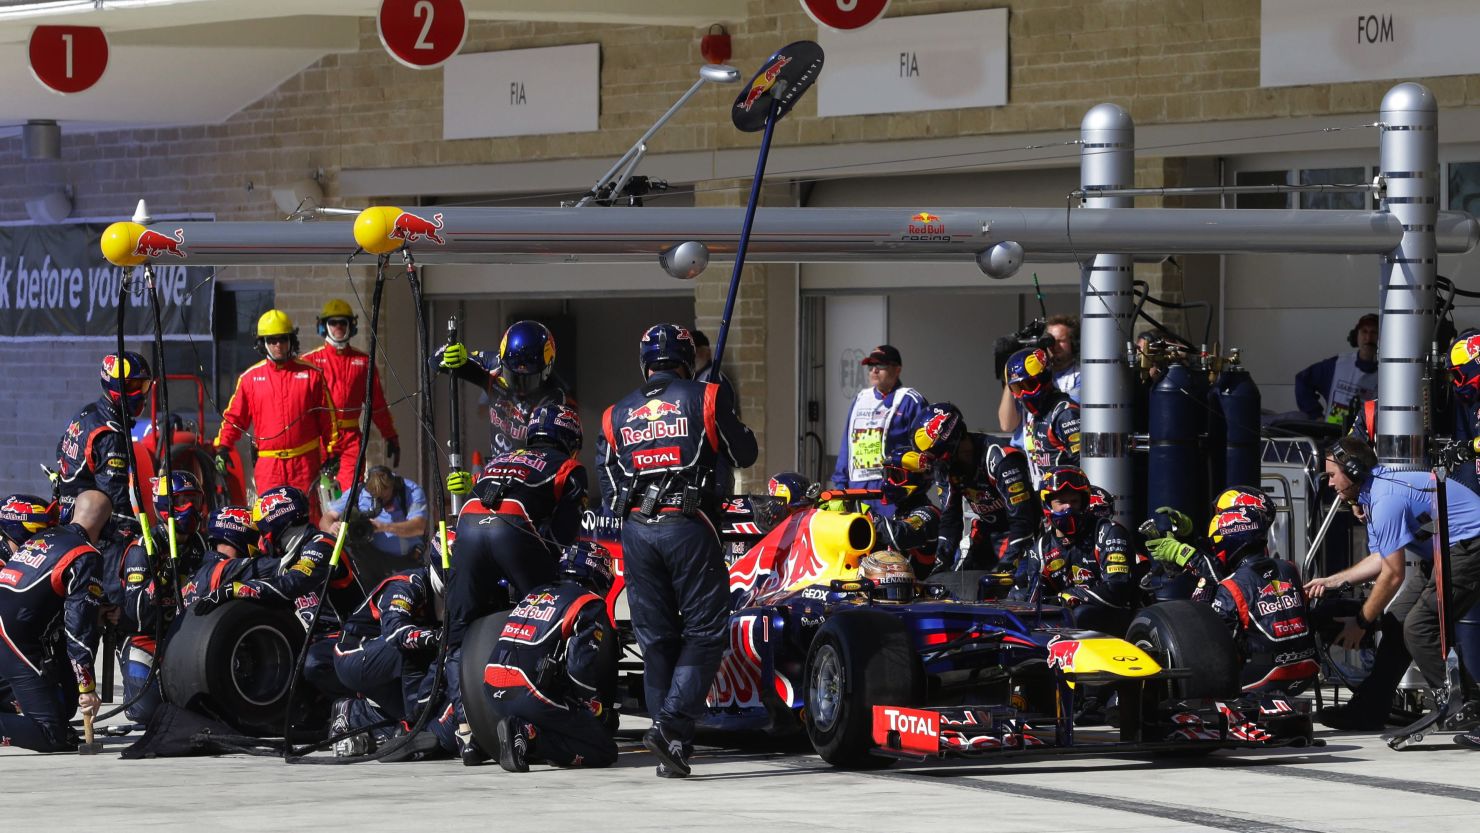 Red Bull's pit crew hard at work during Sunday's U.S. Grand Prix in Austin, Texas on Sunday.   